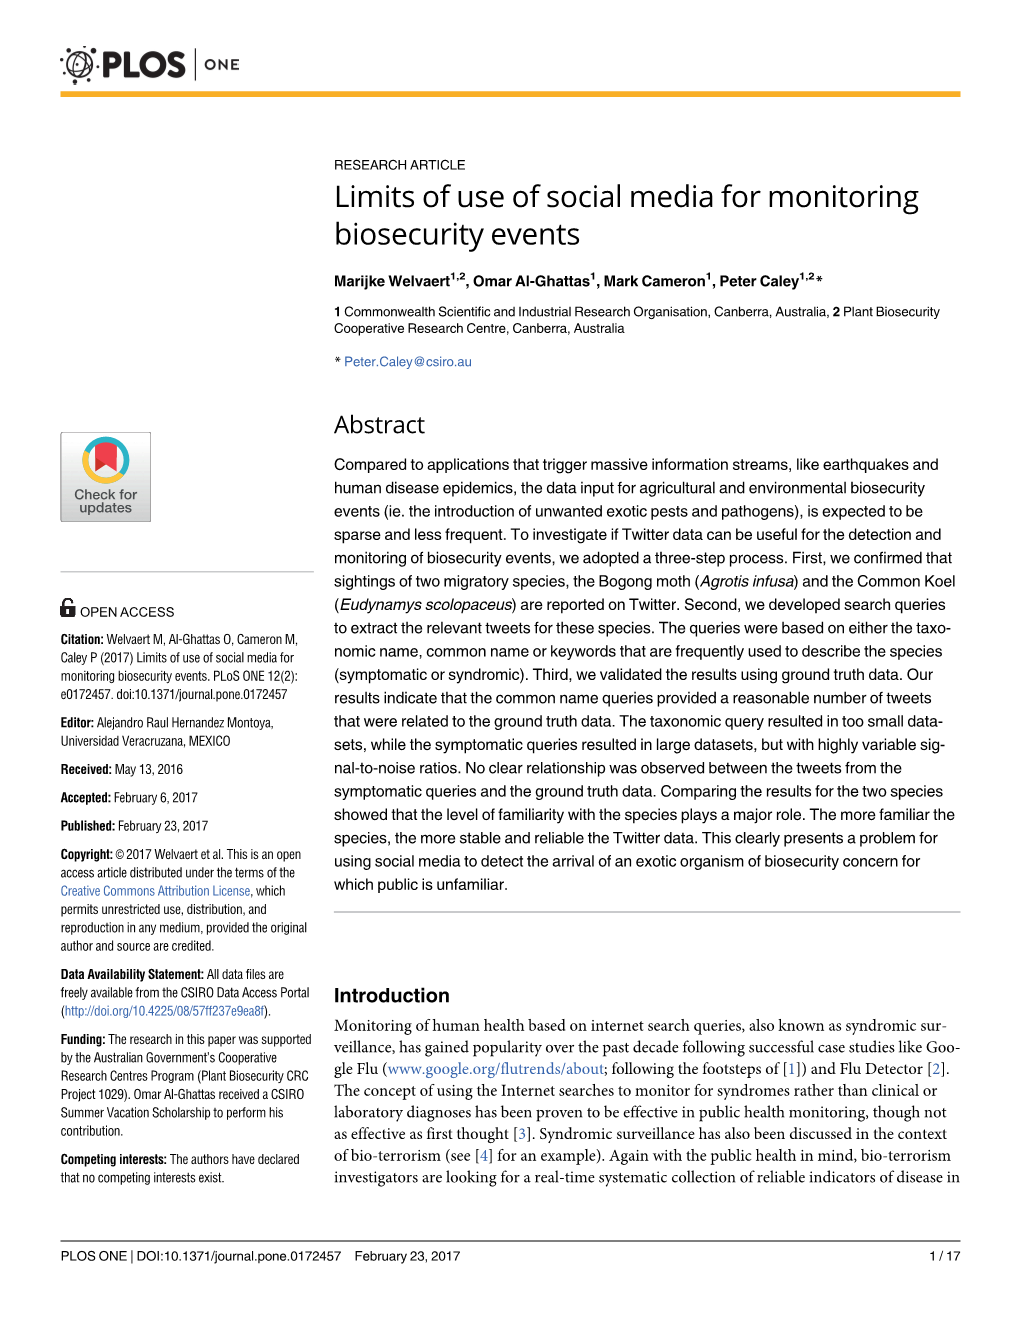 Limits of Use of Social Media for Monitoring Biosecurity Events